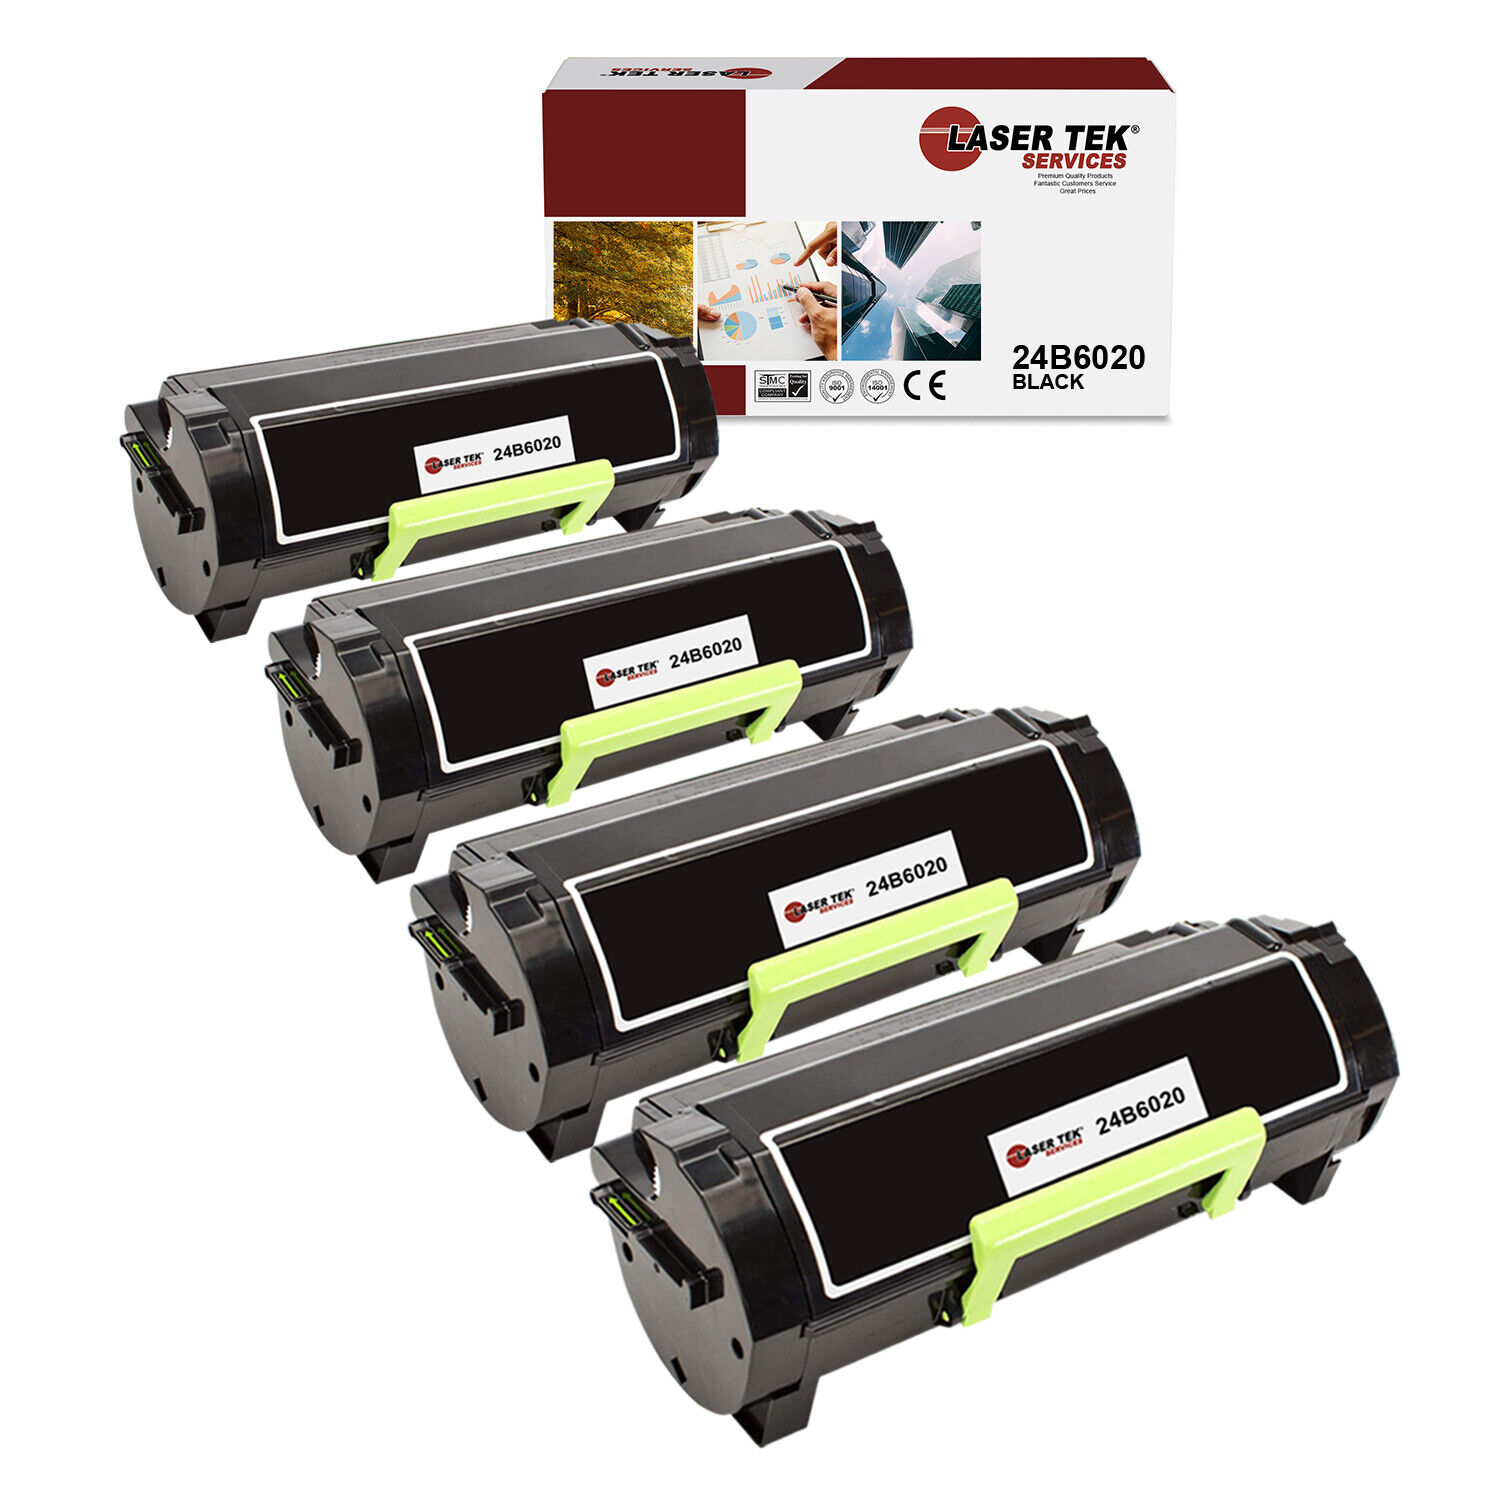 Compatible for Lexmark S1855 Toner Cartridge 17600 Page Yield